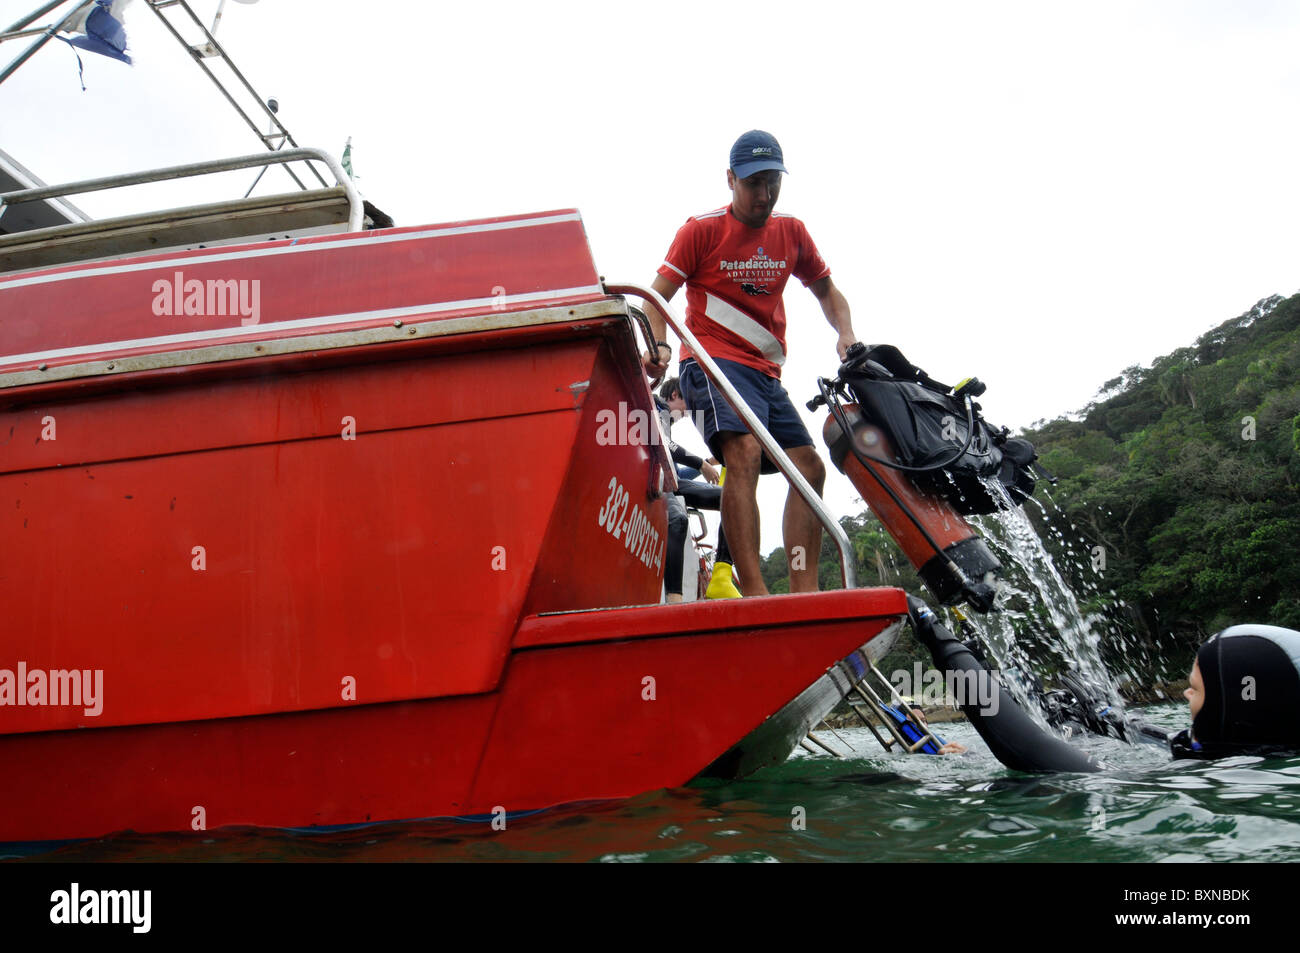 Staff pulls tank out of water as divers return to dive boat, Bombinhas, Santa Catarina, Brazil Stock Photo